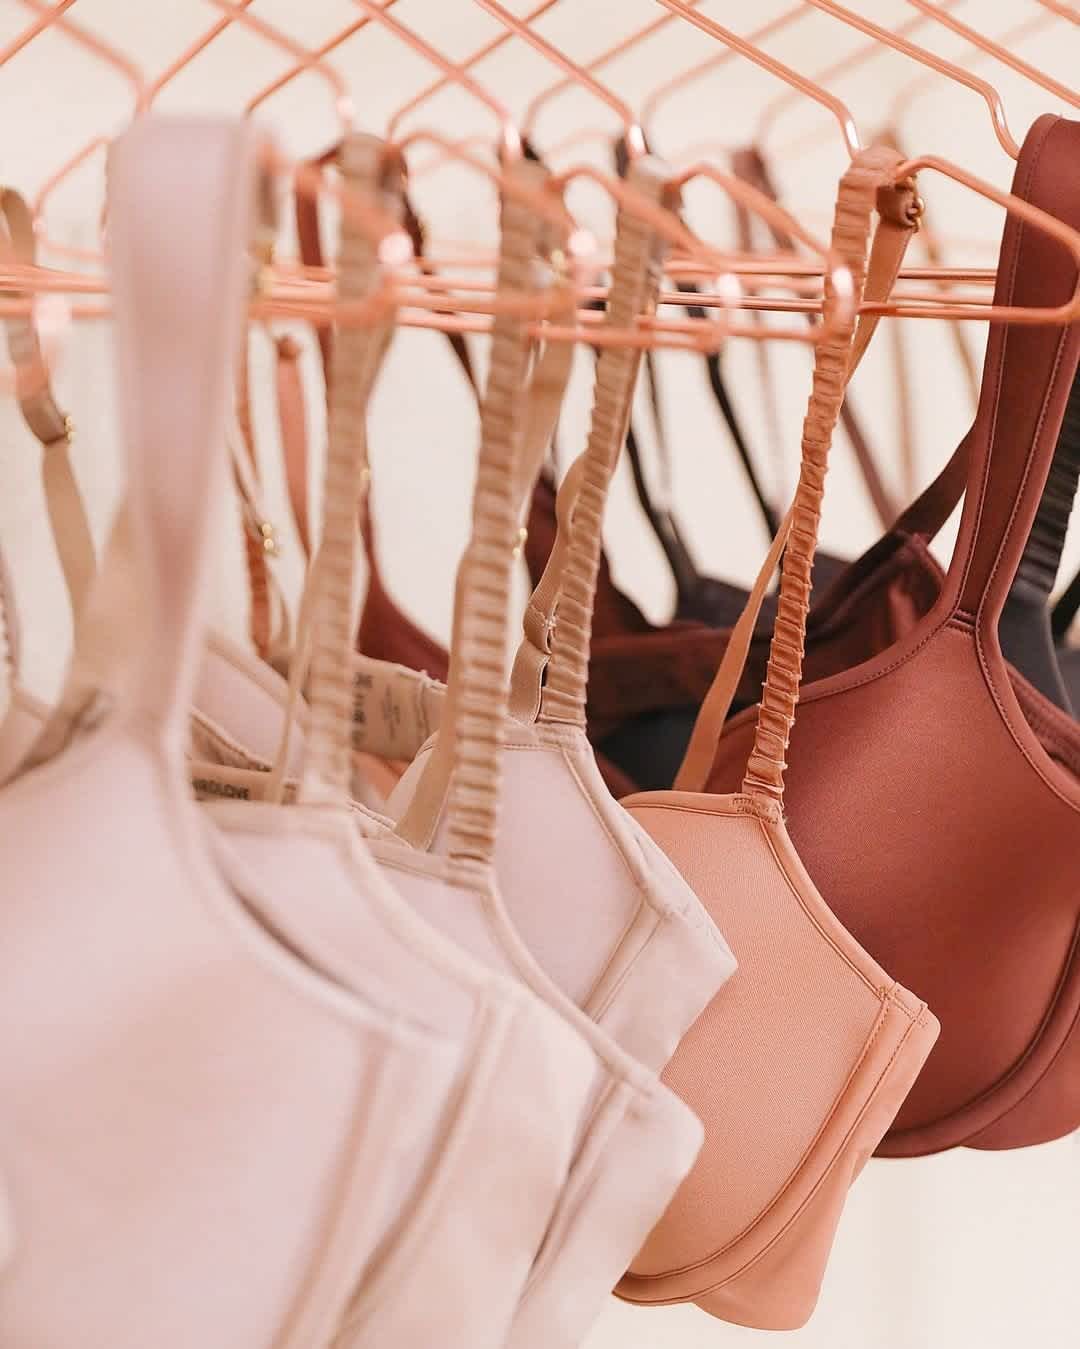 Asymmetrical breasts? Here's how to find the perfect bra